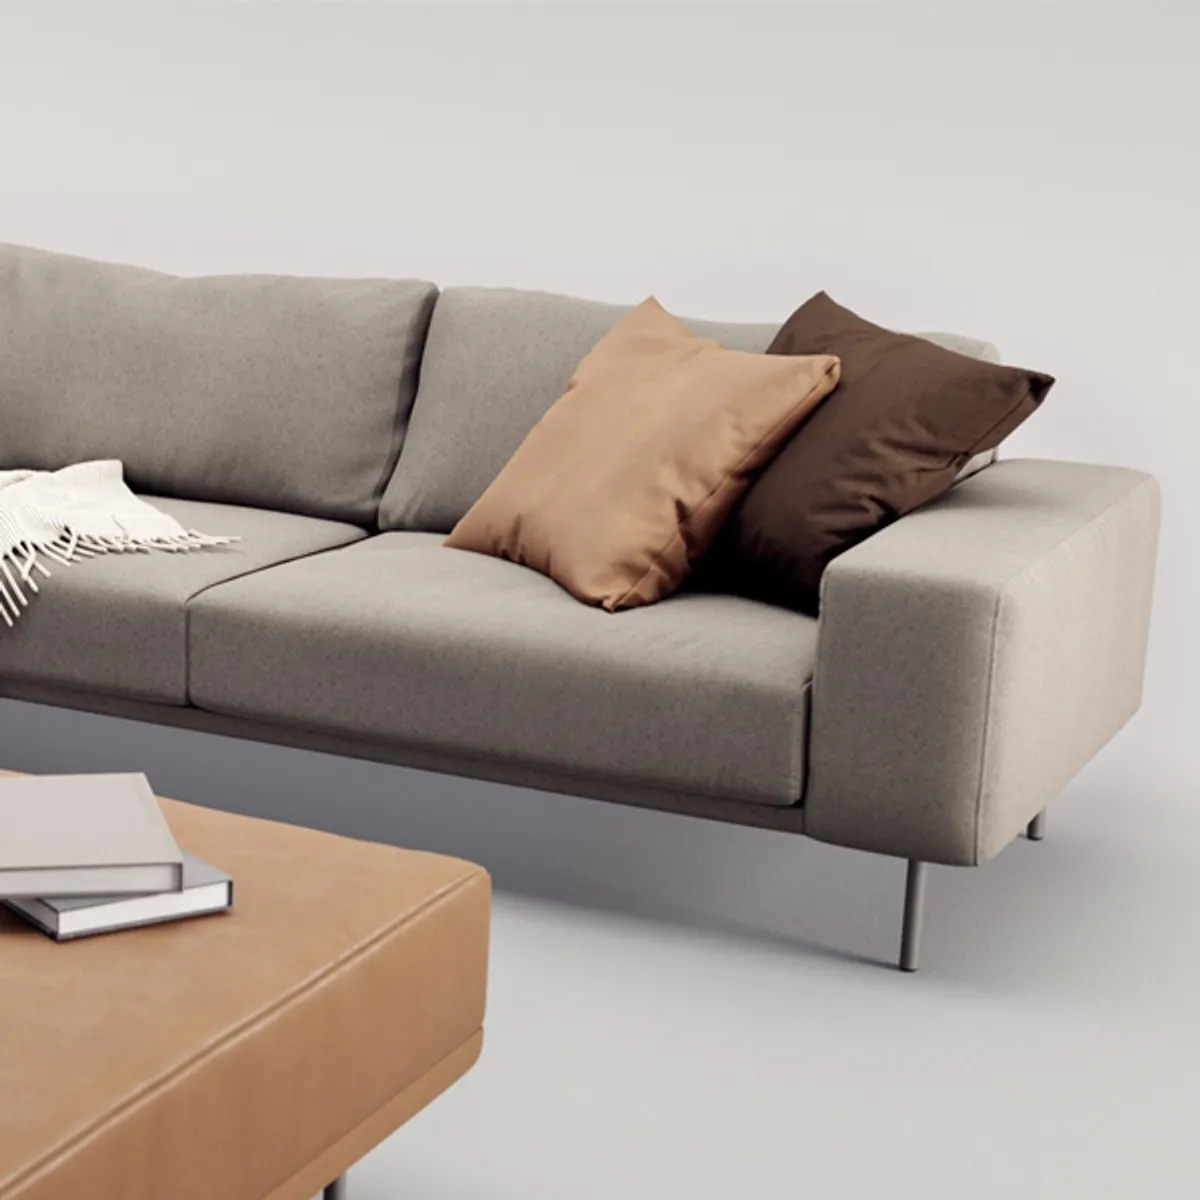 Genera modular sofa Inside Out Contracts2